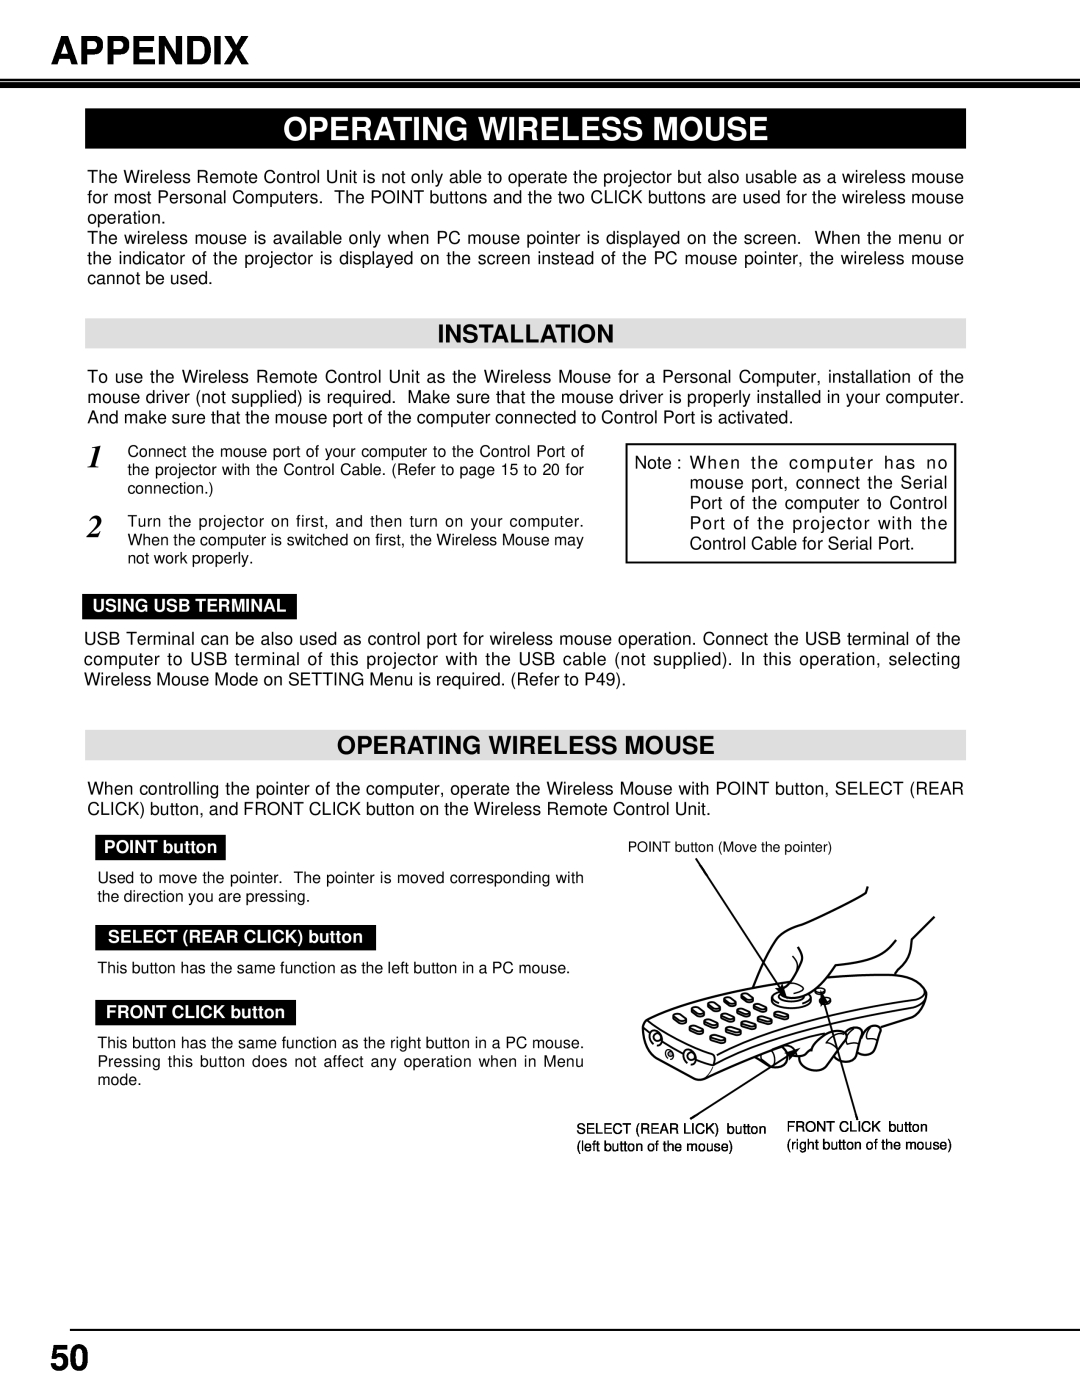 Eiki LC-X3/X3L instruction manual Appendix, Operating Wireless Mouse, Installation 